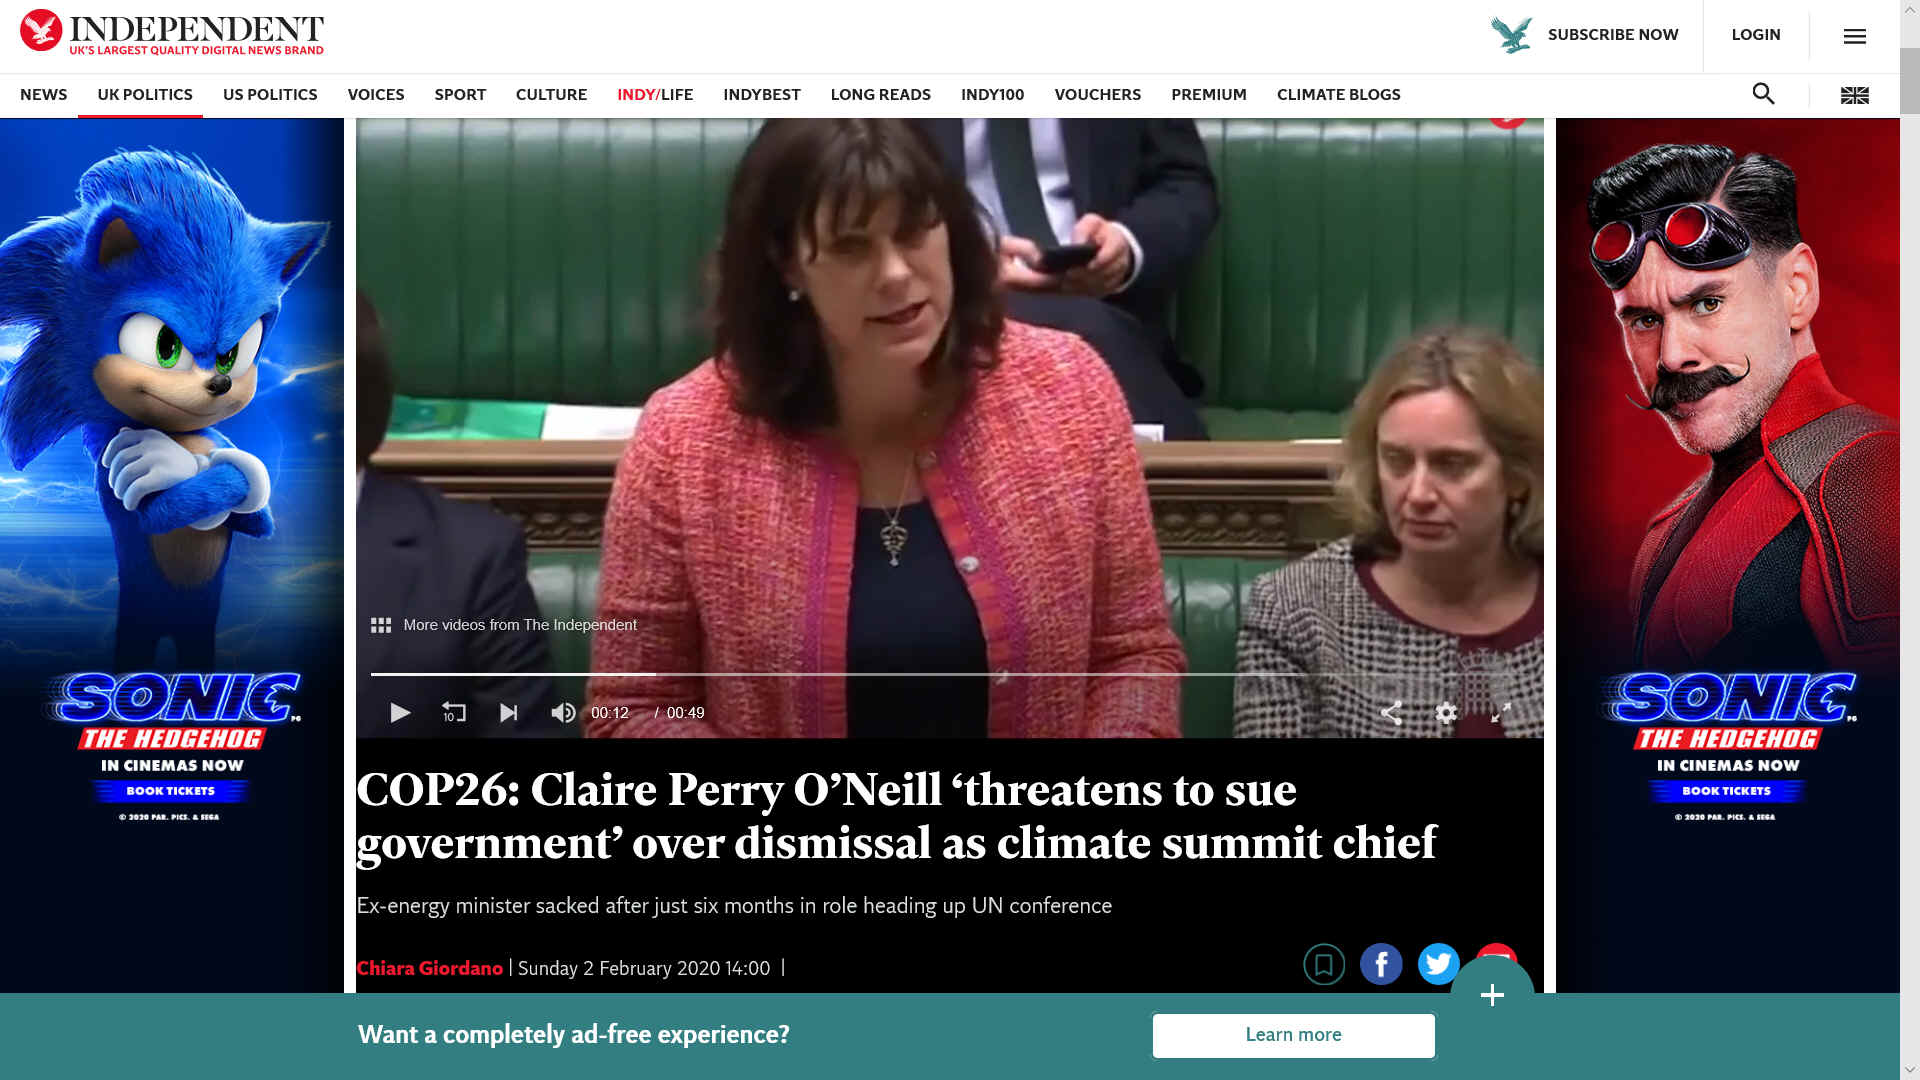 Claire Perry O,Neill COP26 United Nations conference on climate change